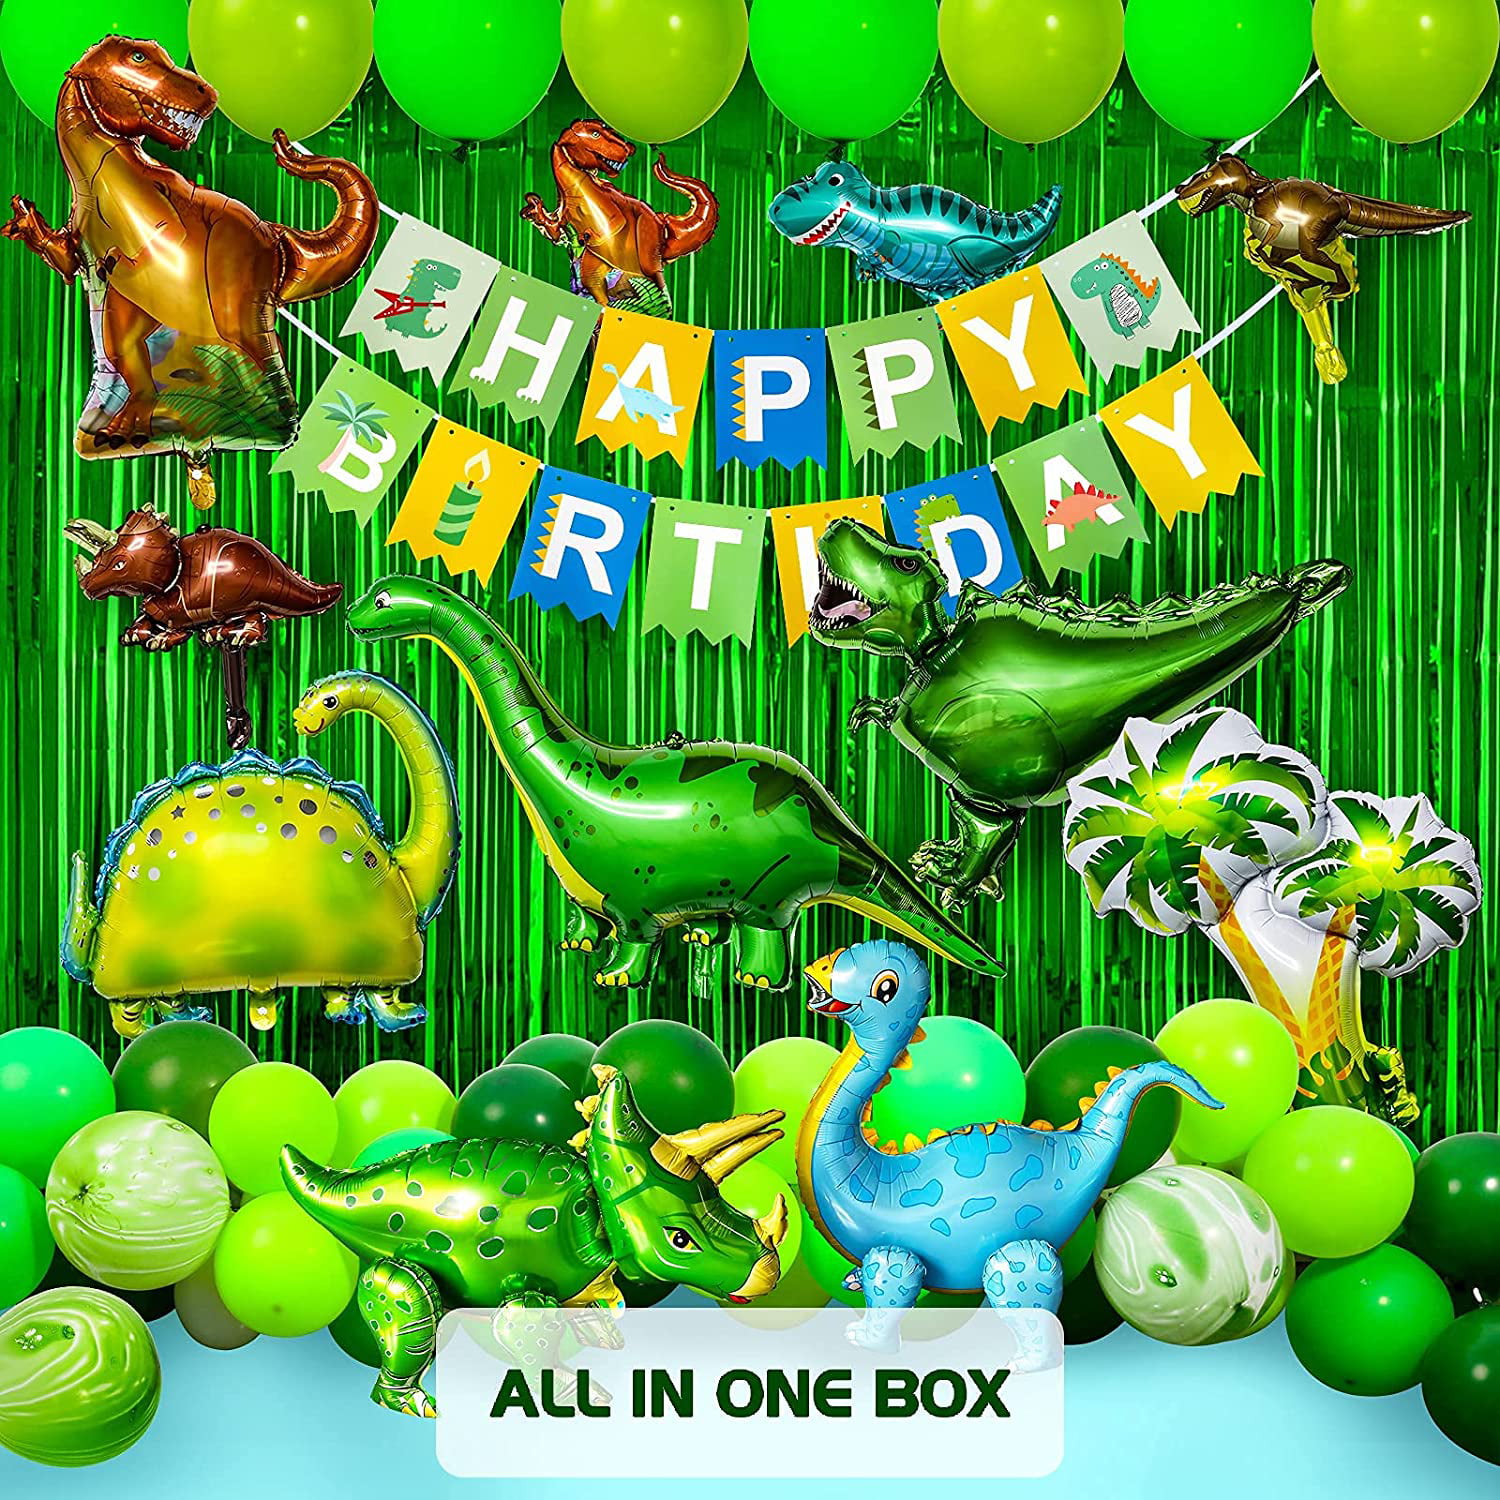 Dinosaur Party Supplies Includes a Happy Birthday Banner Great for Kids Dinosaur Birthday Party a Birthday Cake Topper 36 Boys Birthday Party Decorations Pack 22 Cupcake Toppers 12 High Quality Latex Balloons 